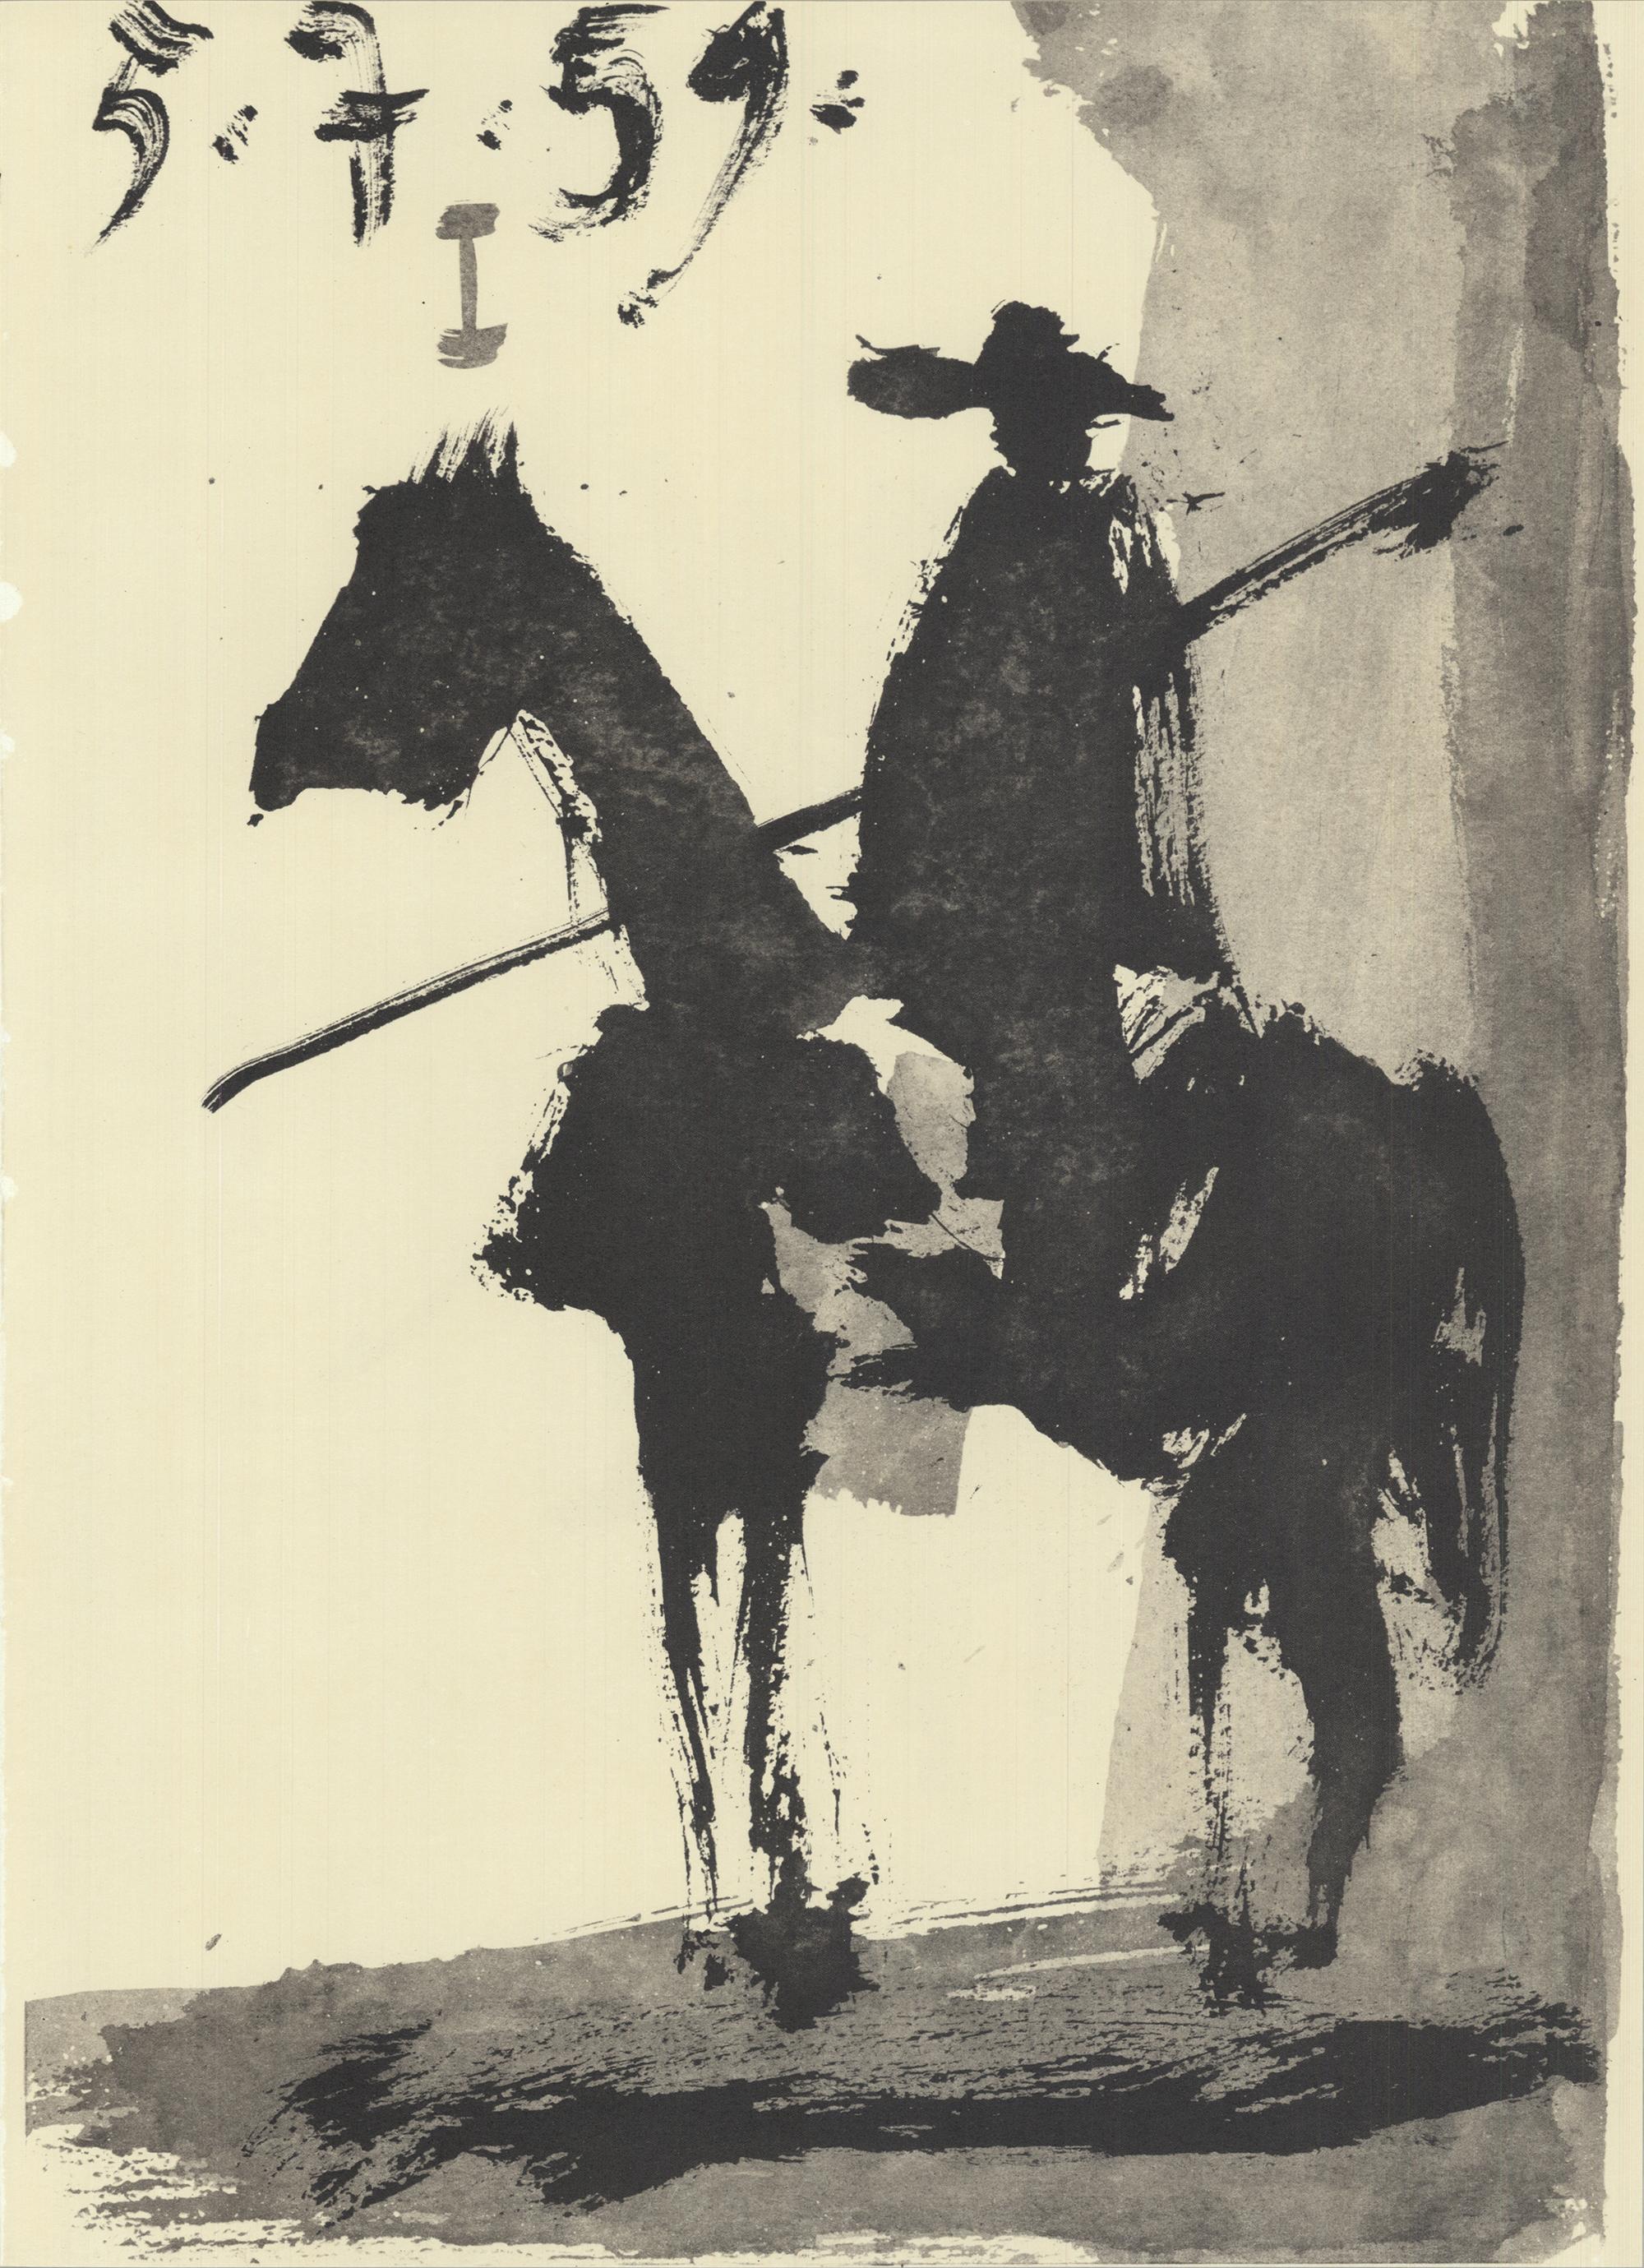 (after) Pablo Picasso Figurative Print - 1959 Pablo Picasso 'Bullfighter on Horse' Lithograph